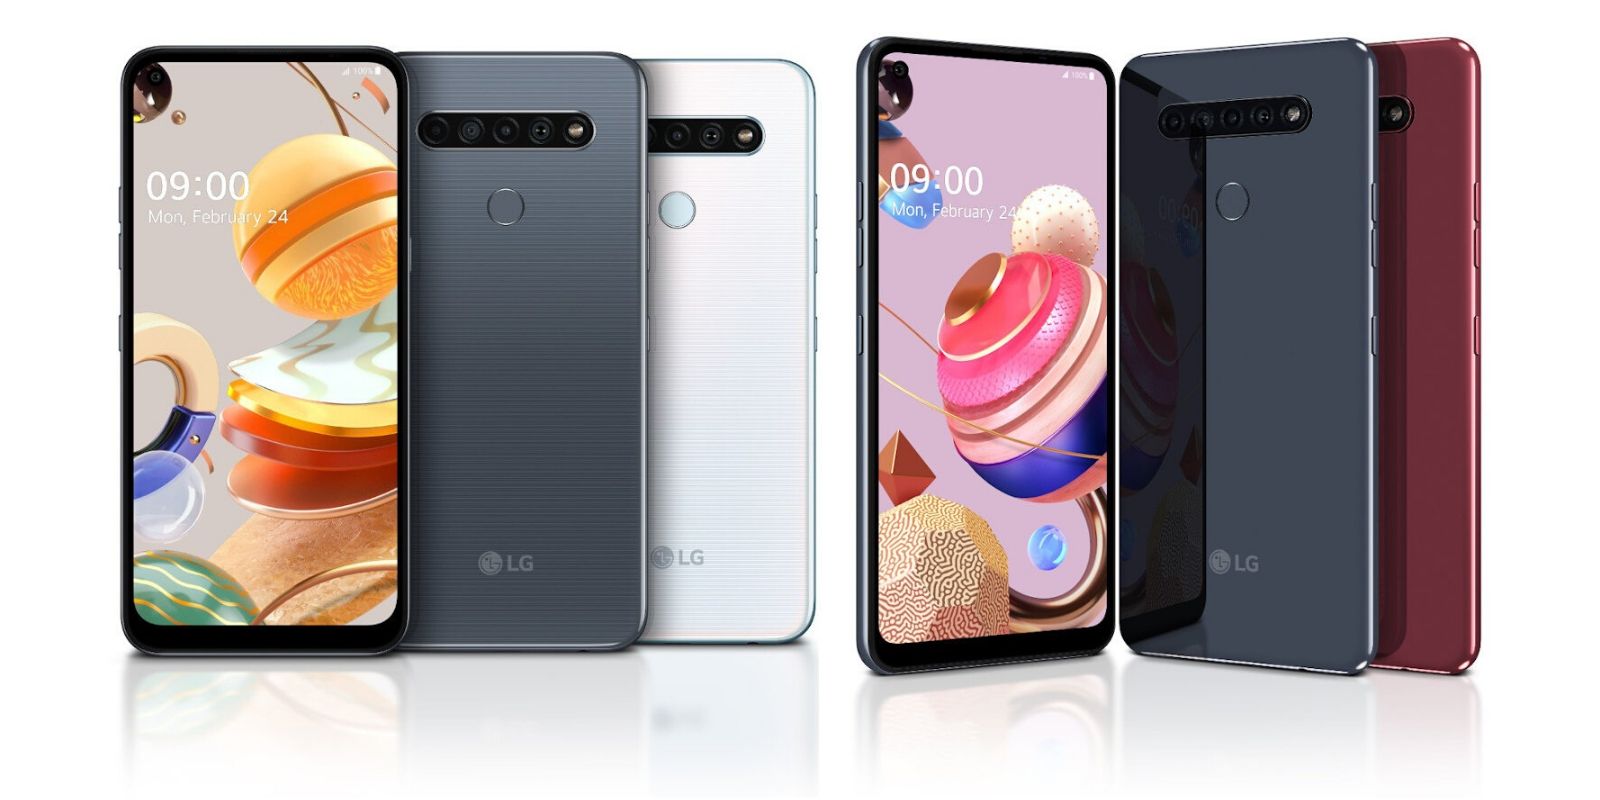 Lg Adds A 48Mp Camera To Budget K-Series Smartphone